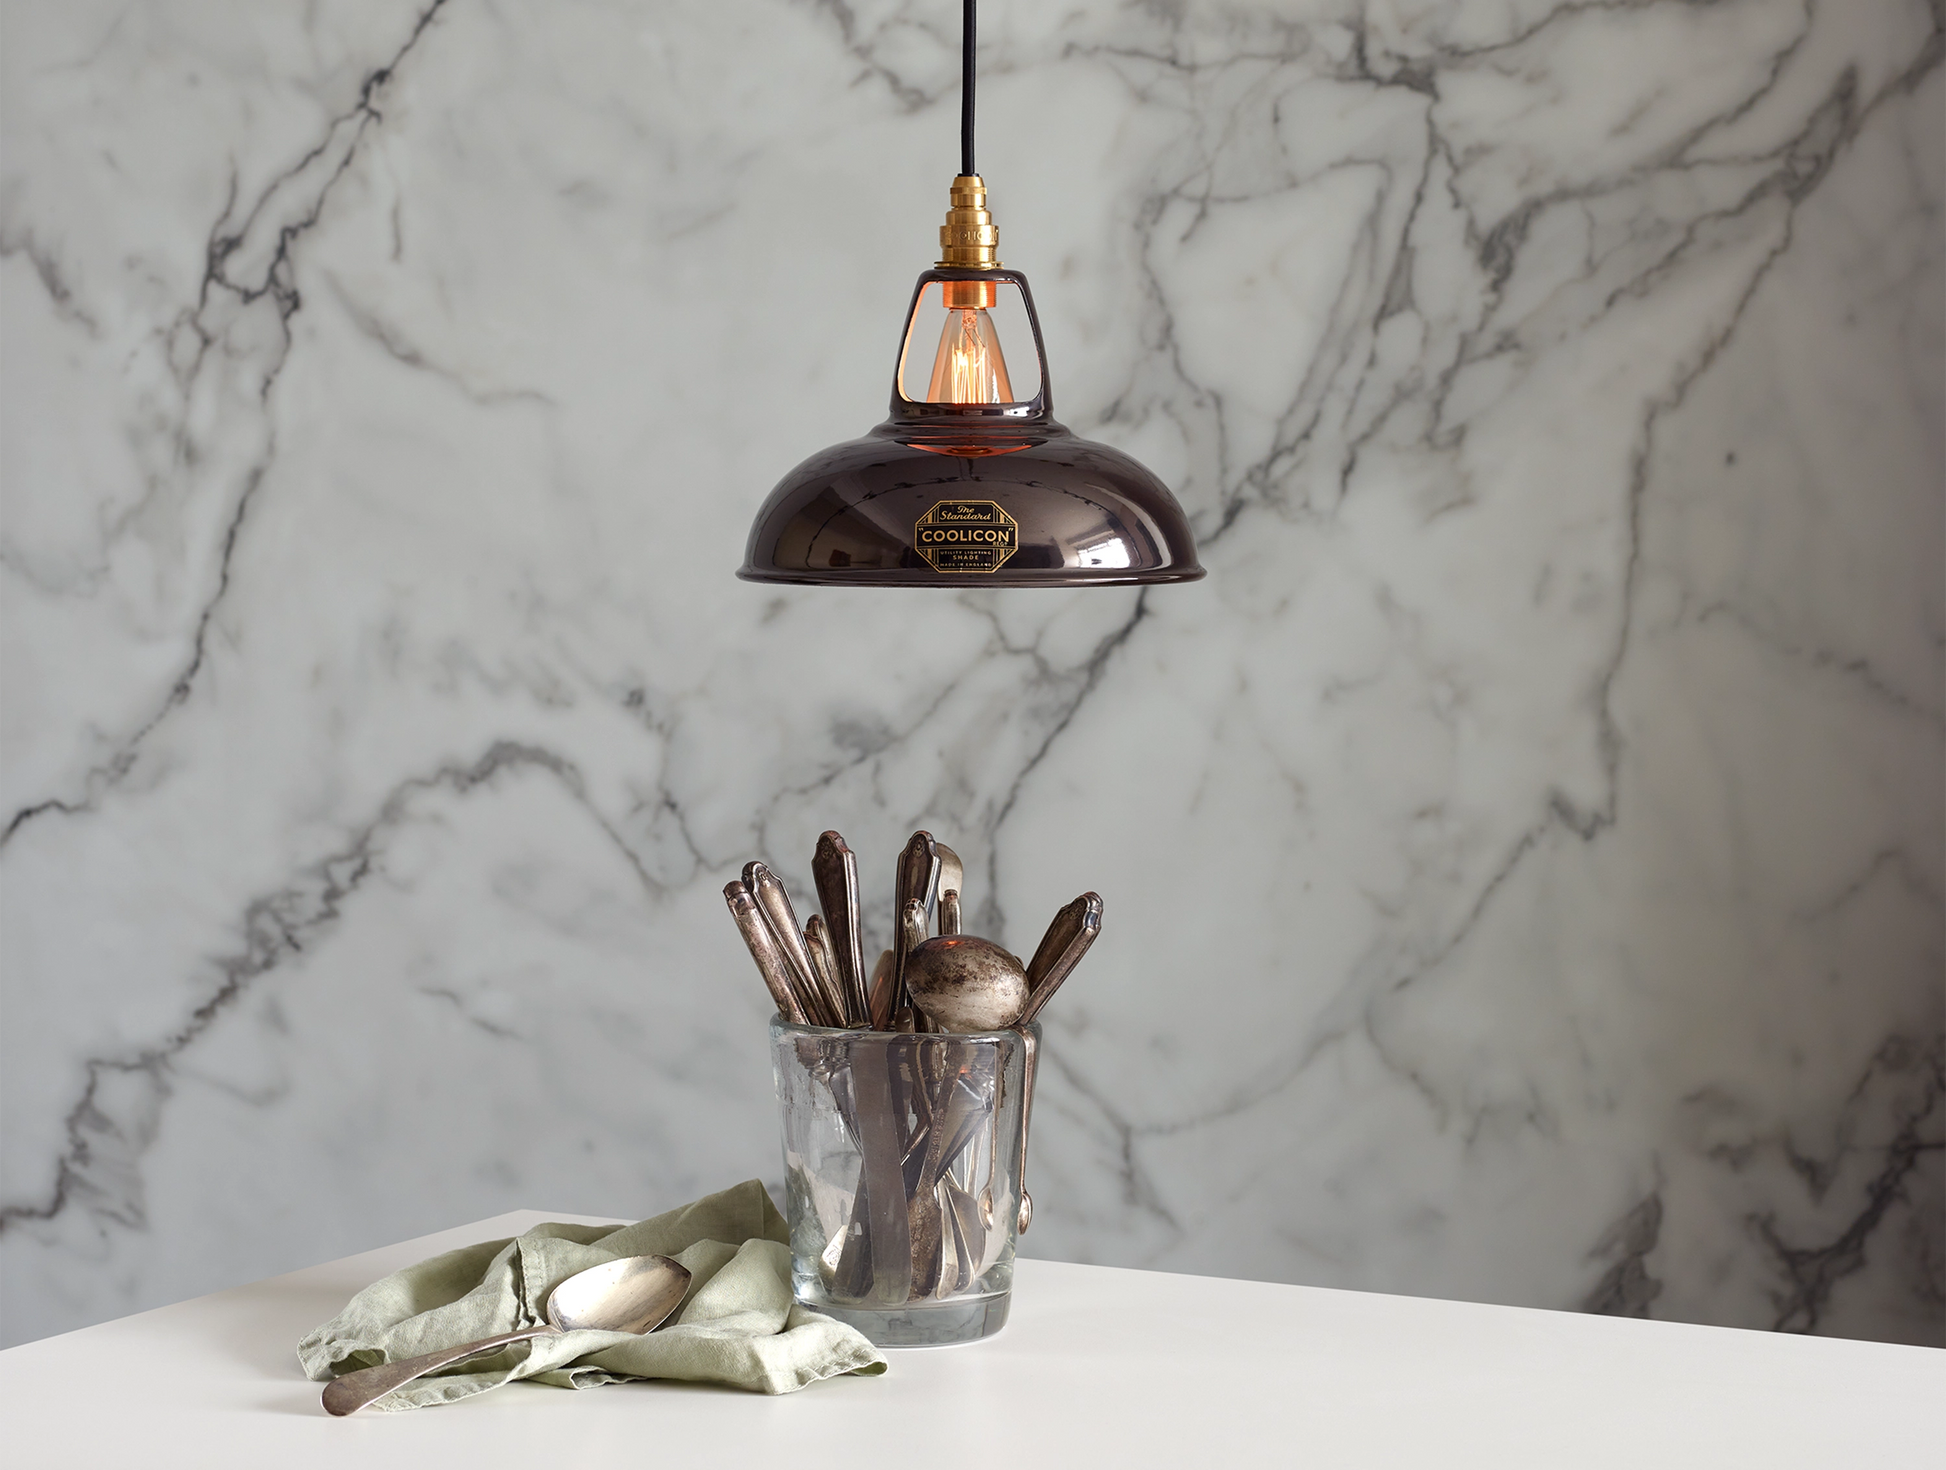 A Coolicon Pewter grey lampshade with a Signature Brass pendant set hanging above a table with a glass container with a set of old cutlery. The background is a marble wallpaper.